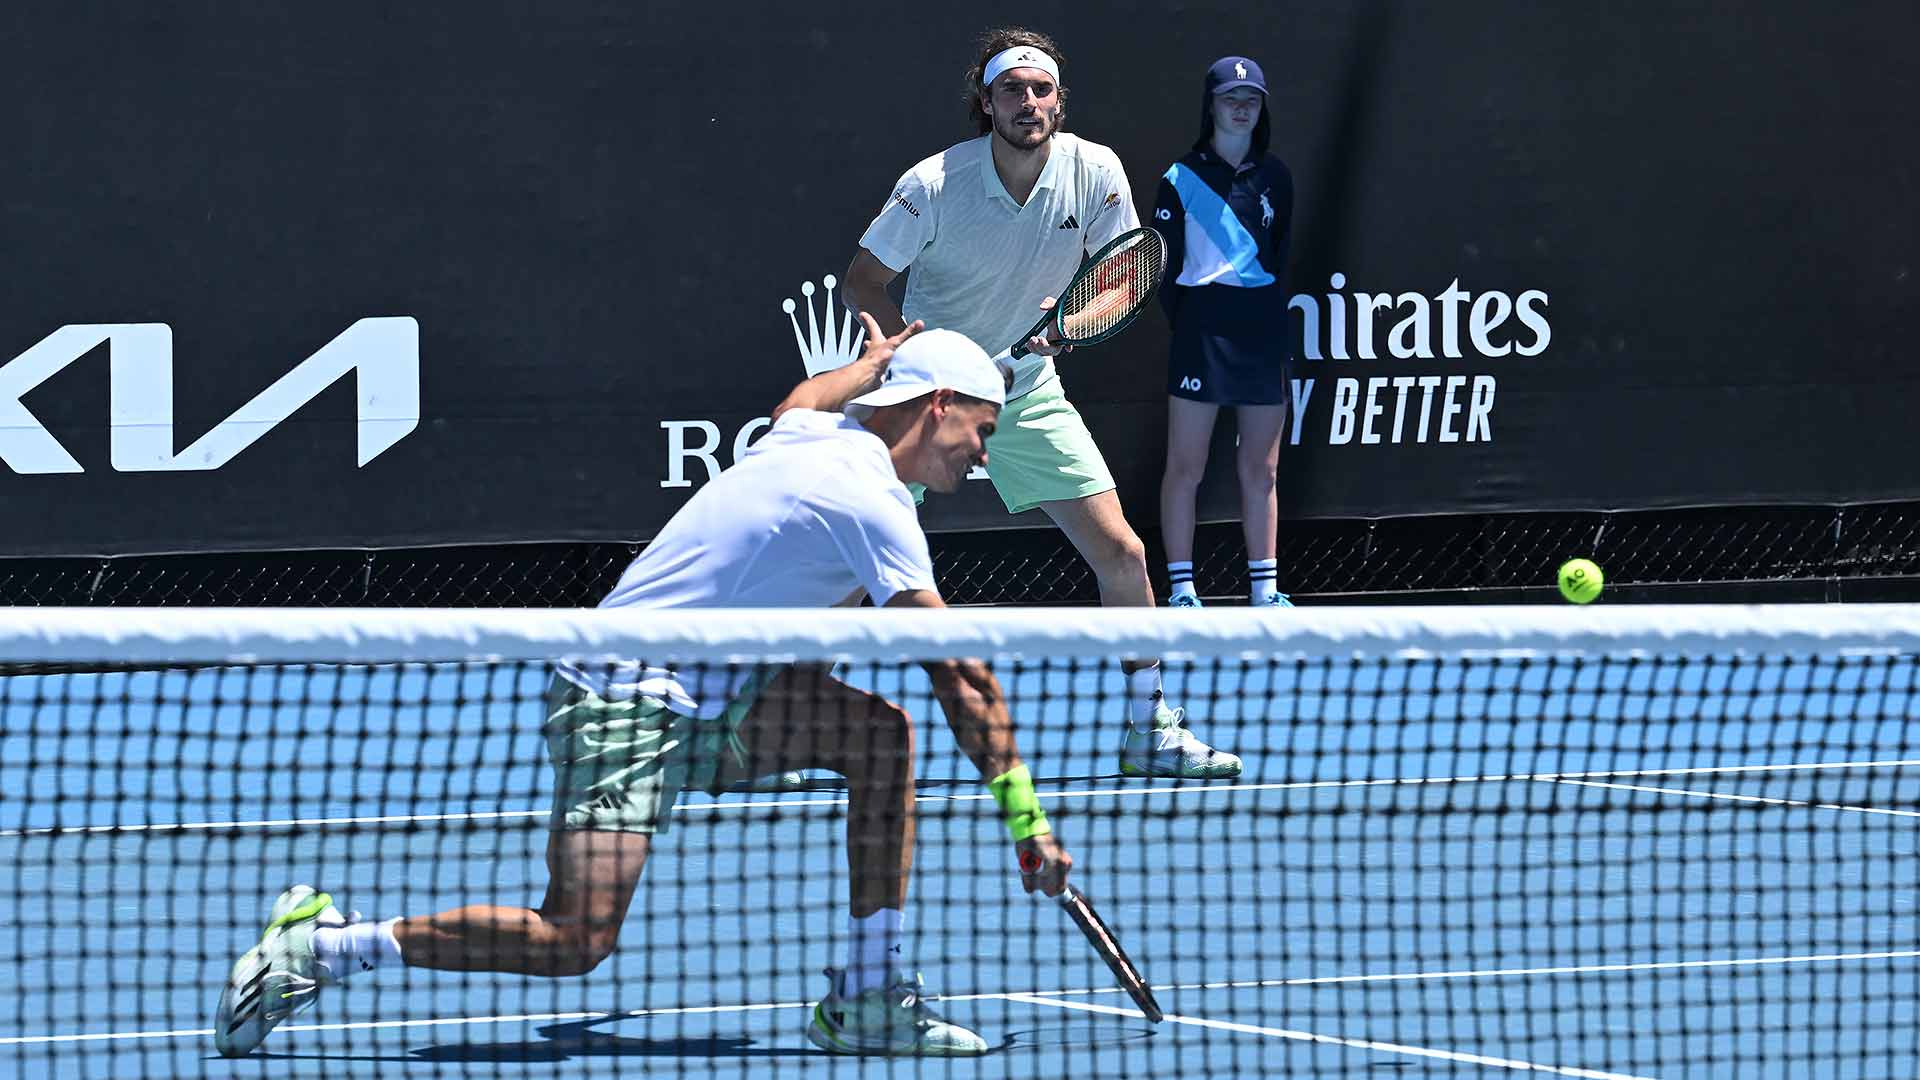 Petros Tsitsipas (at net) and Stefanos Tsitsipas fall on the first day of doubles play at the Australian Open Tuesday in Melbourne.